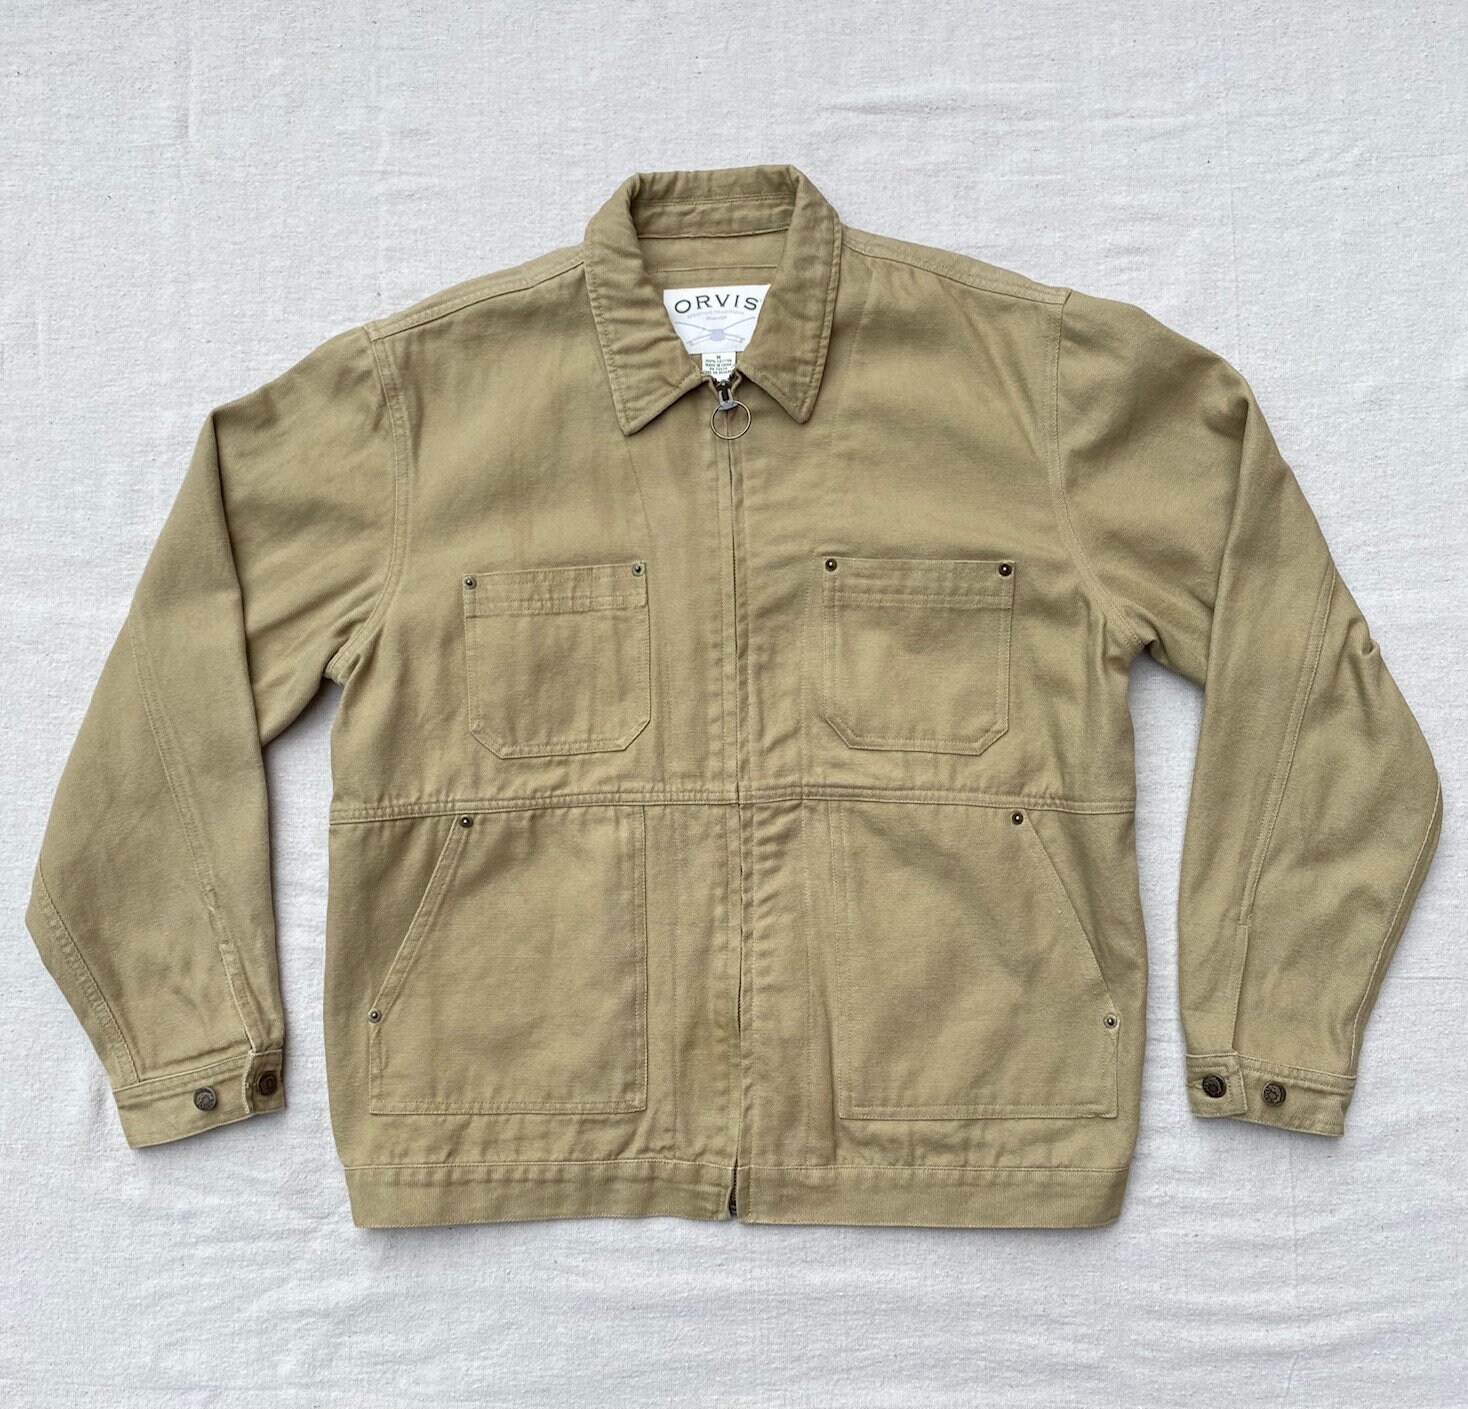 Vintage Vintage 90s Orvis Spell Out Fly Fishing Bomber Jacket